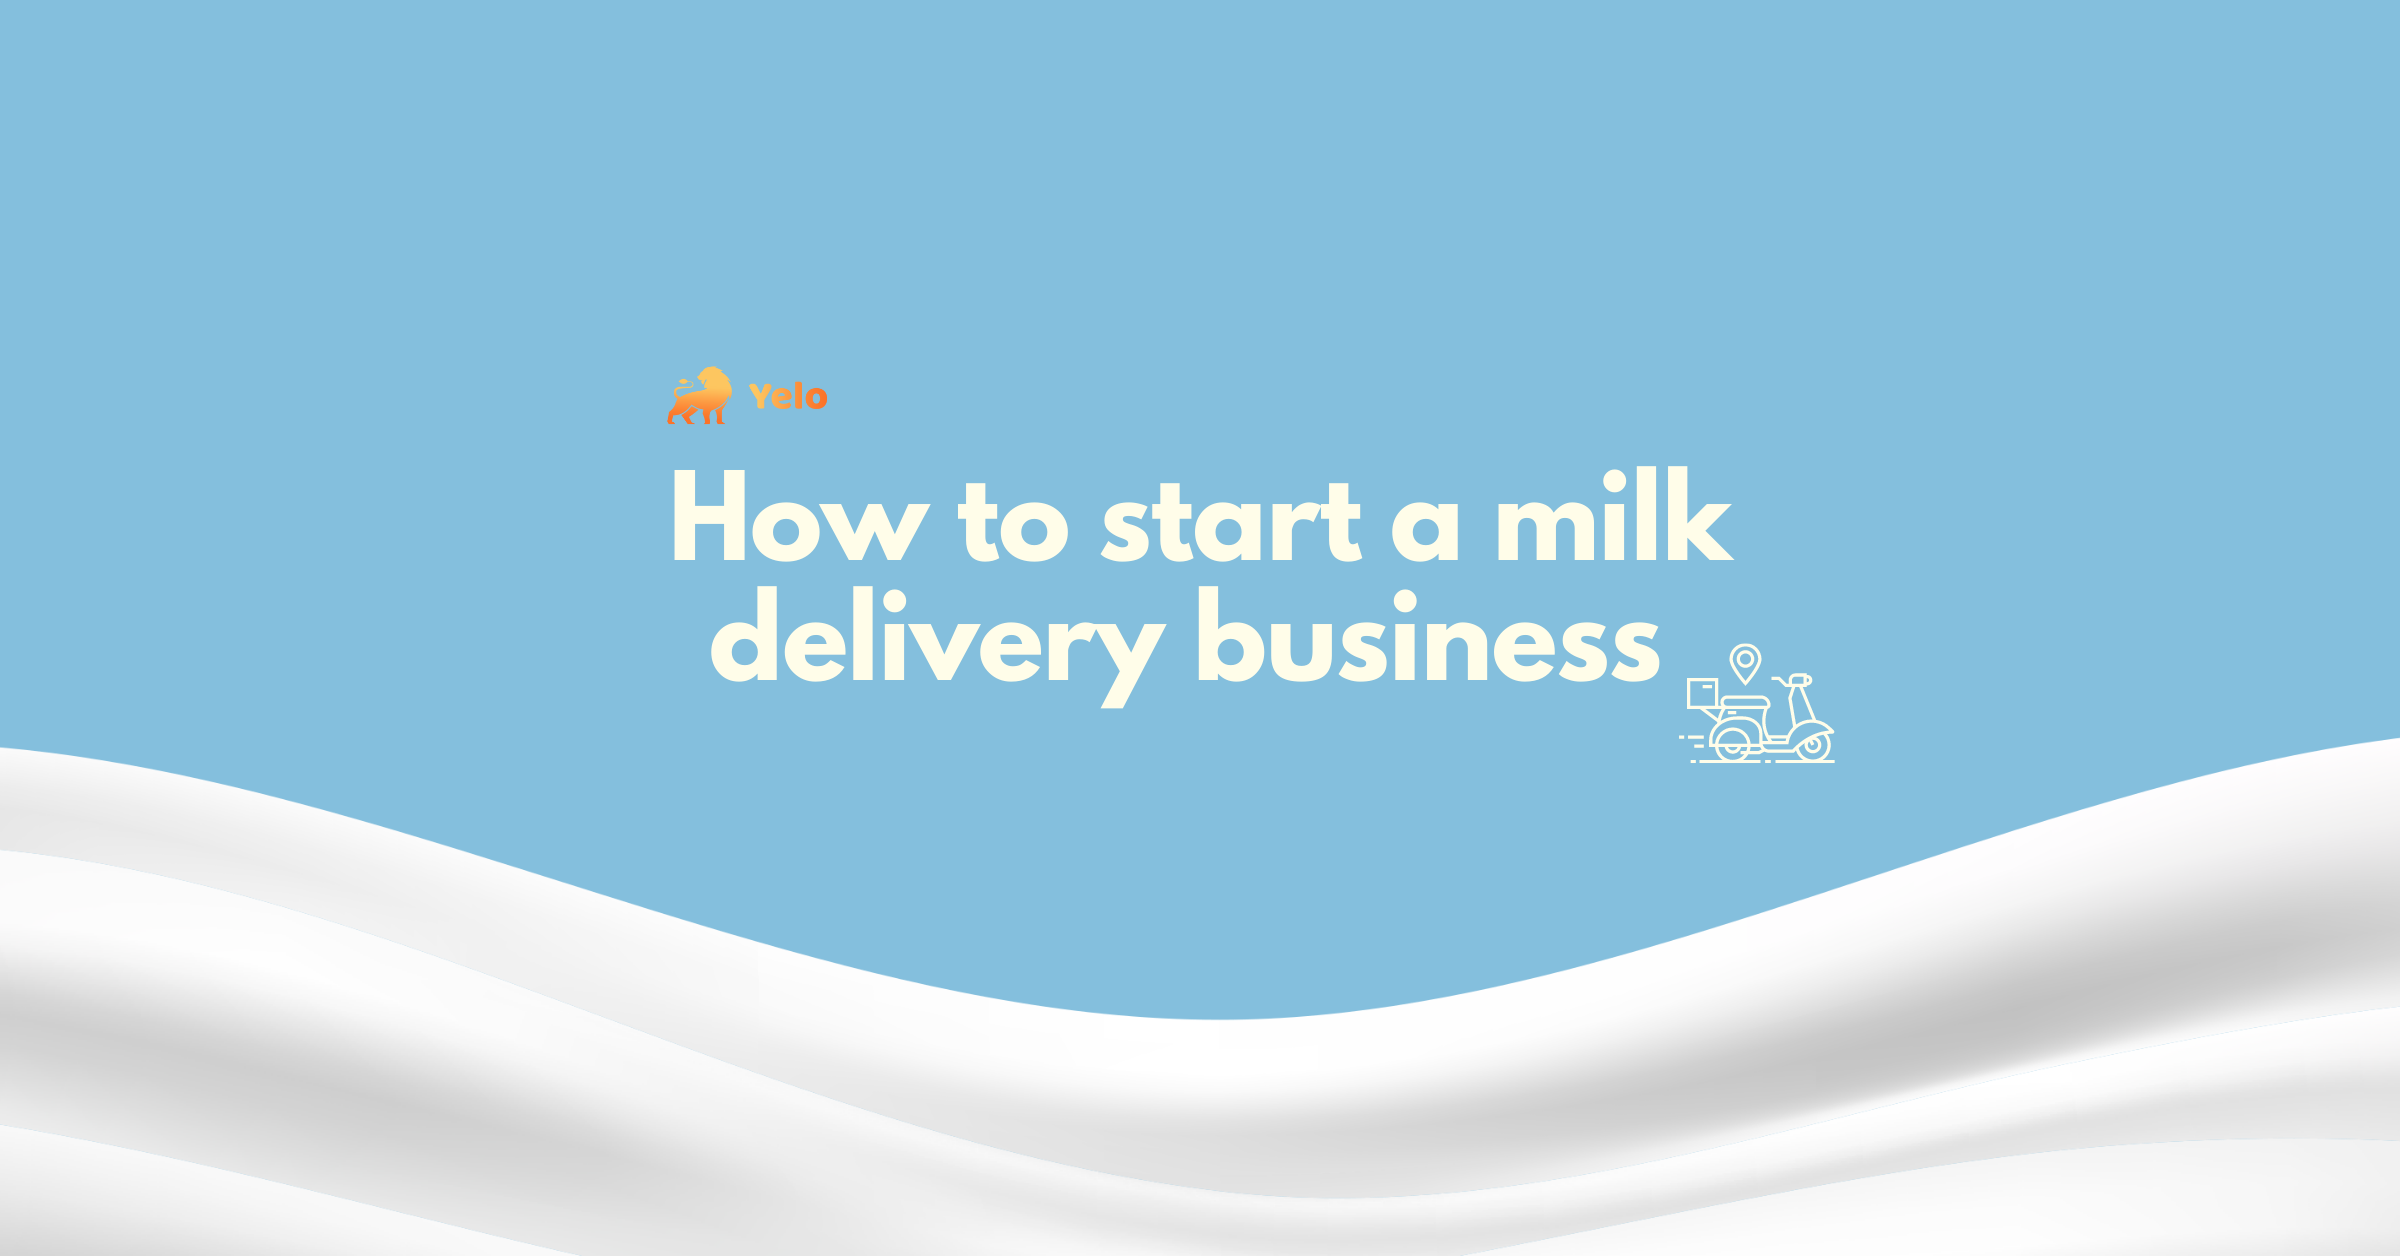 Milk delivery business